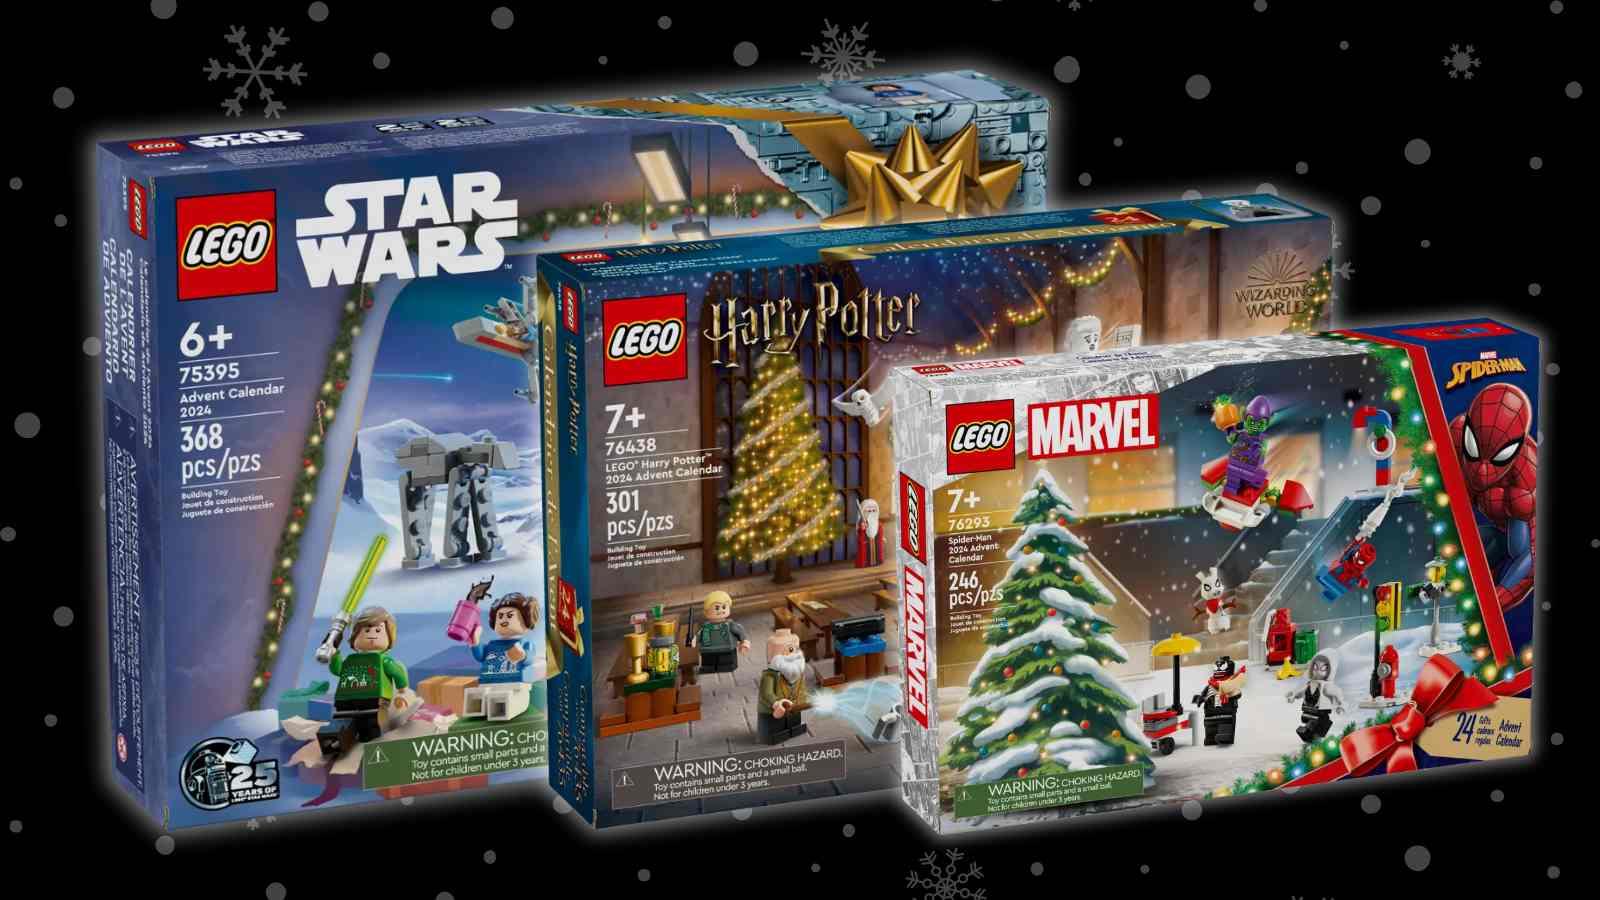 Three of the upcoming LEGO Advent Calendars